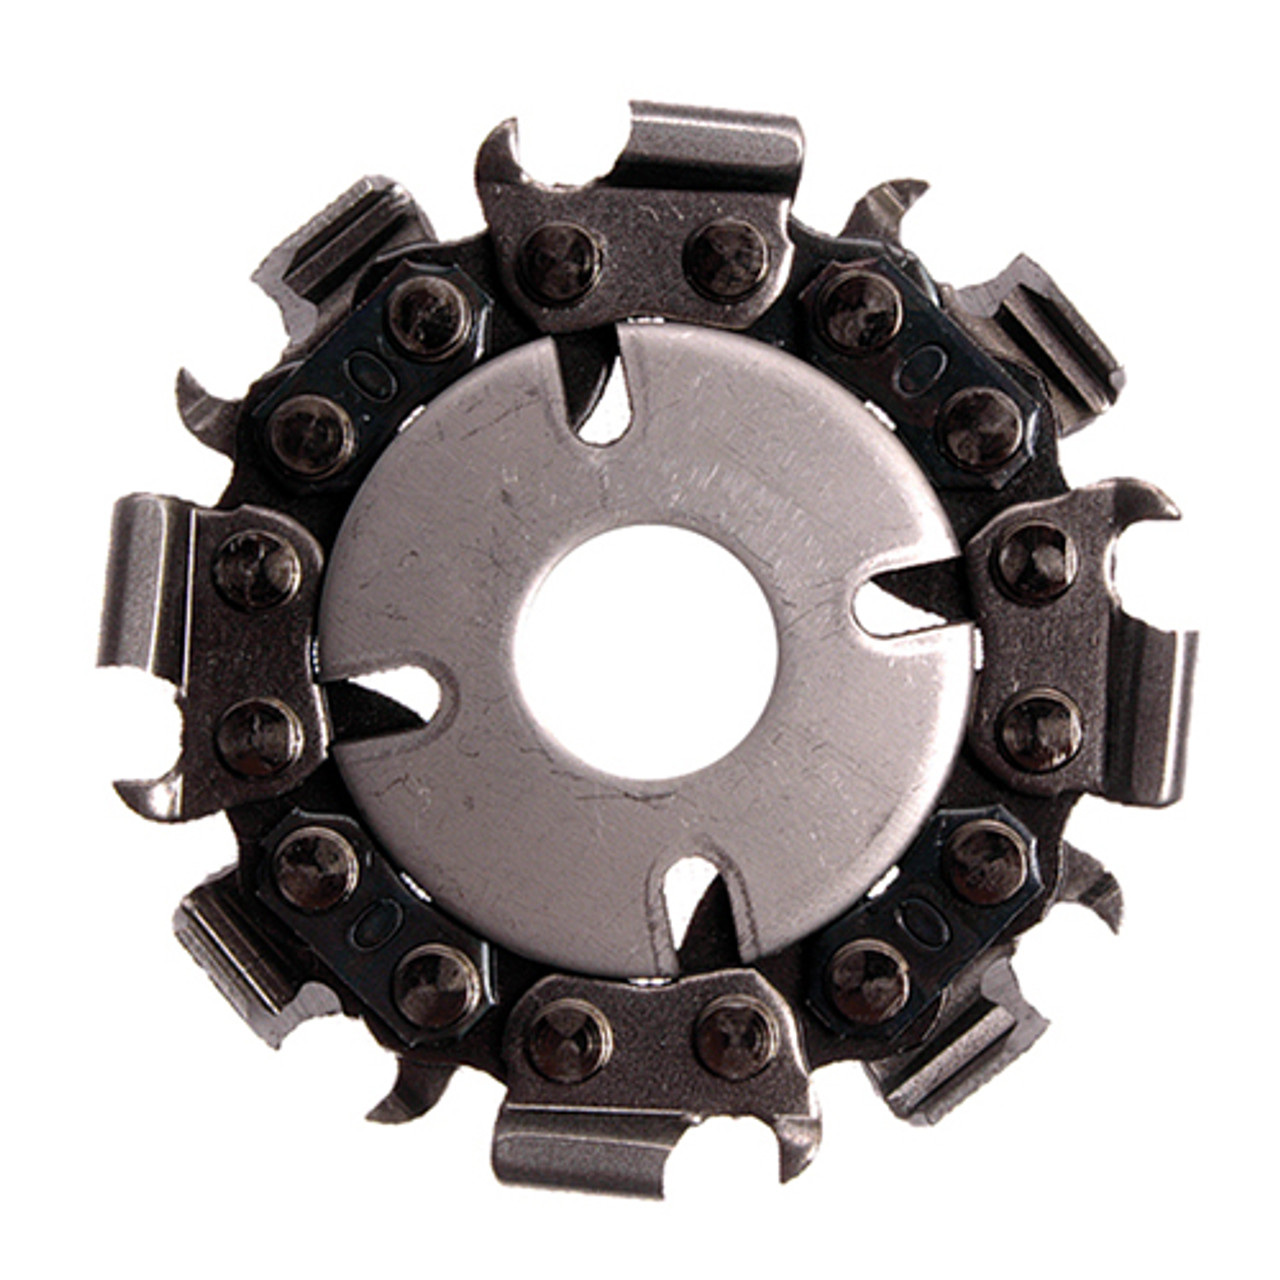 King Arthur's Merlin2 8 Tooth Saw Chain Disc Set